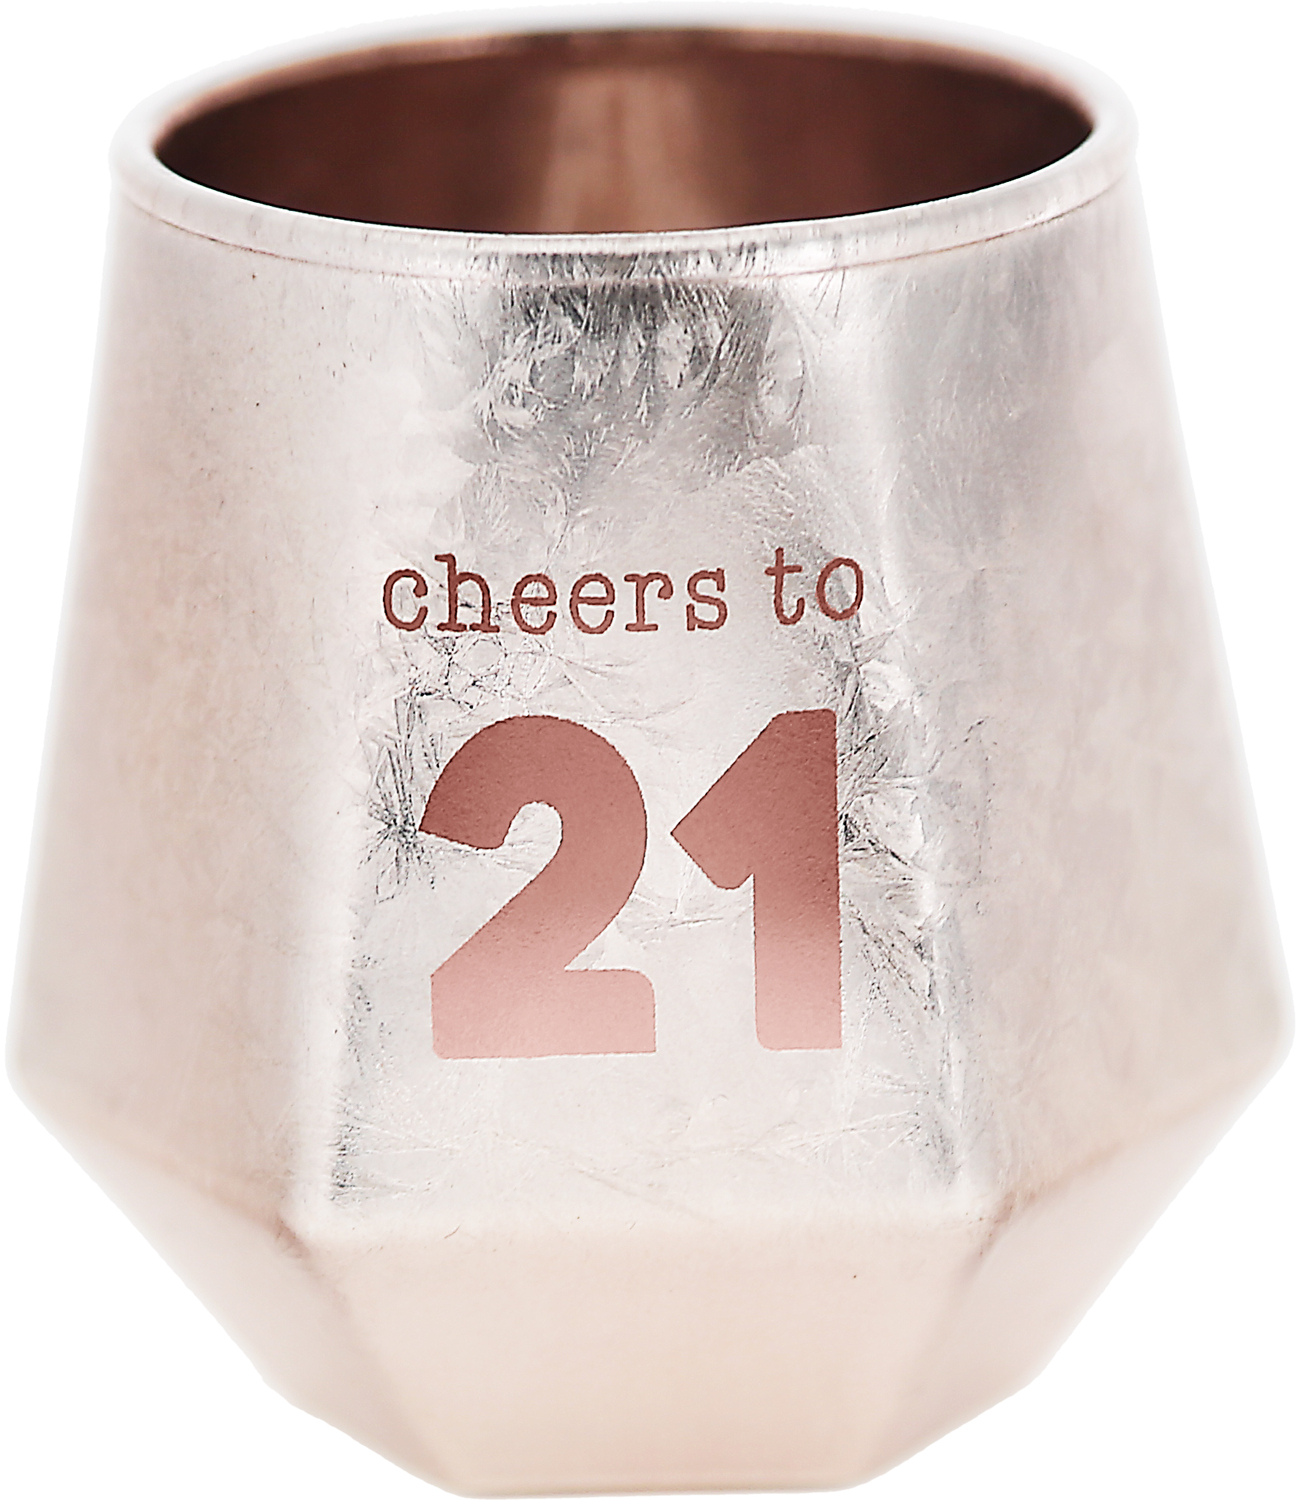 Cheers to 21 by Happy Confetti to You - Cheers to 21 - 3 oz Geometric Shot Glass